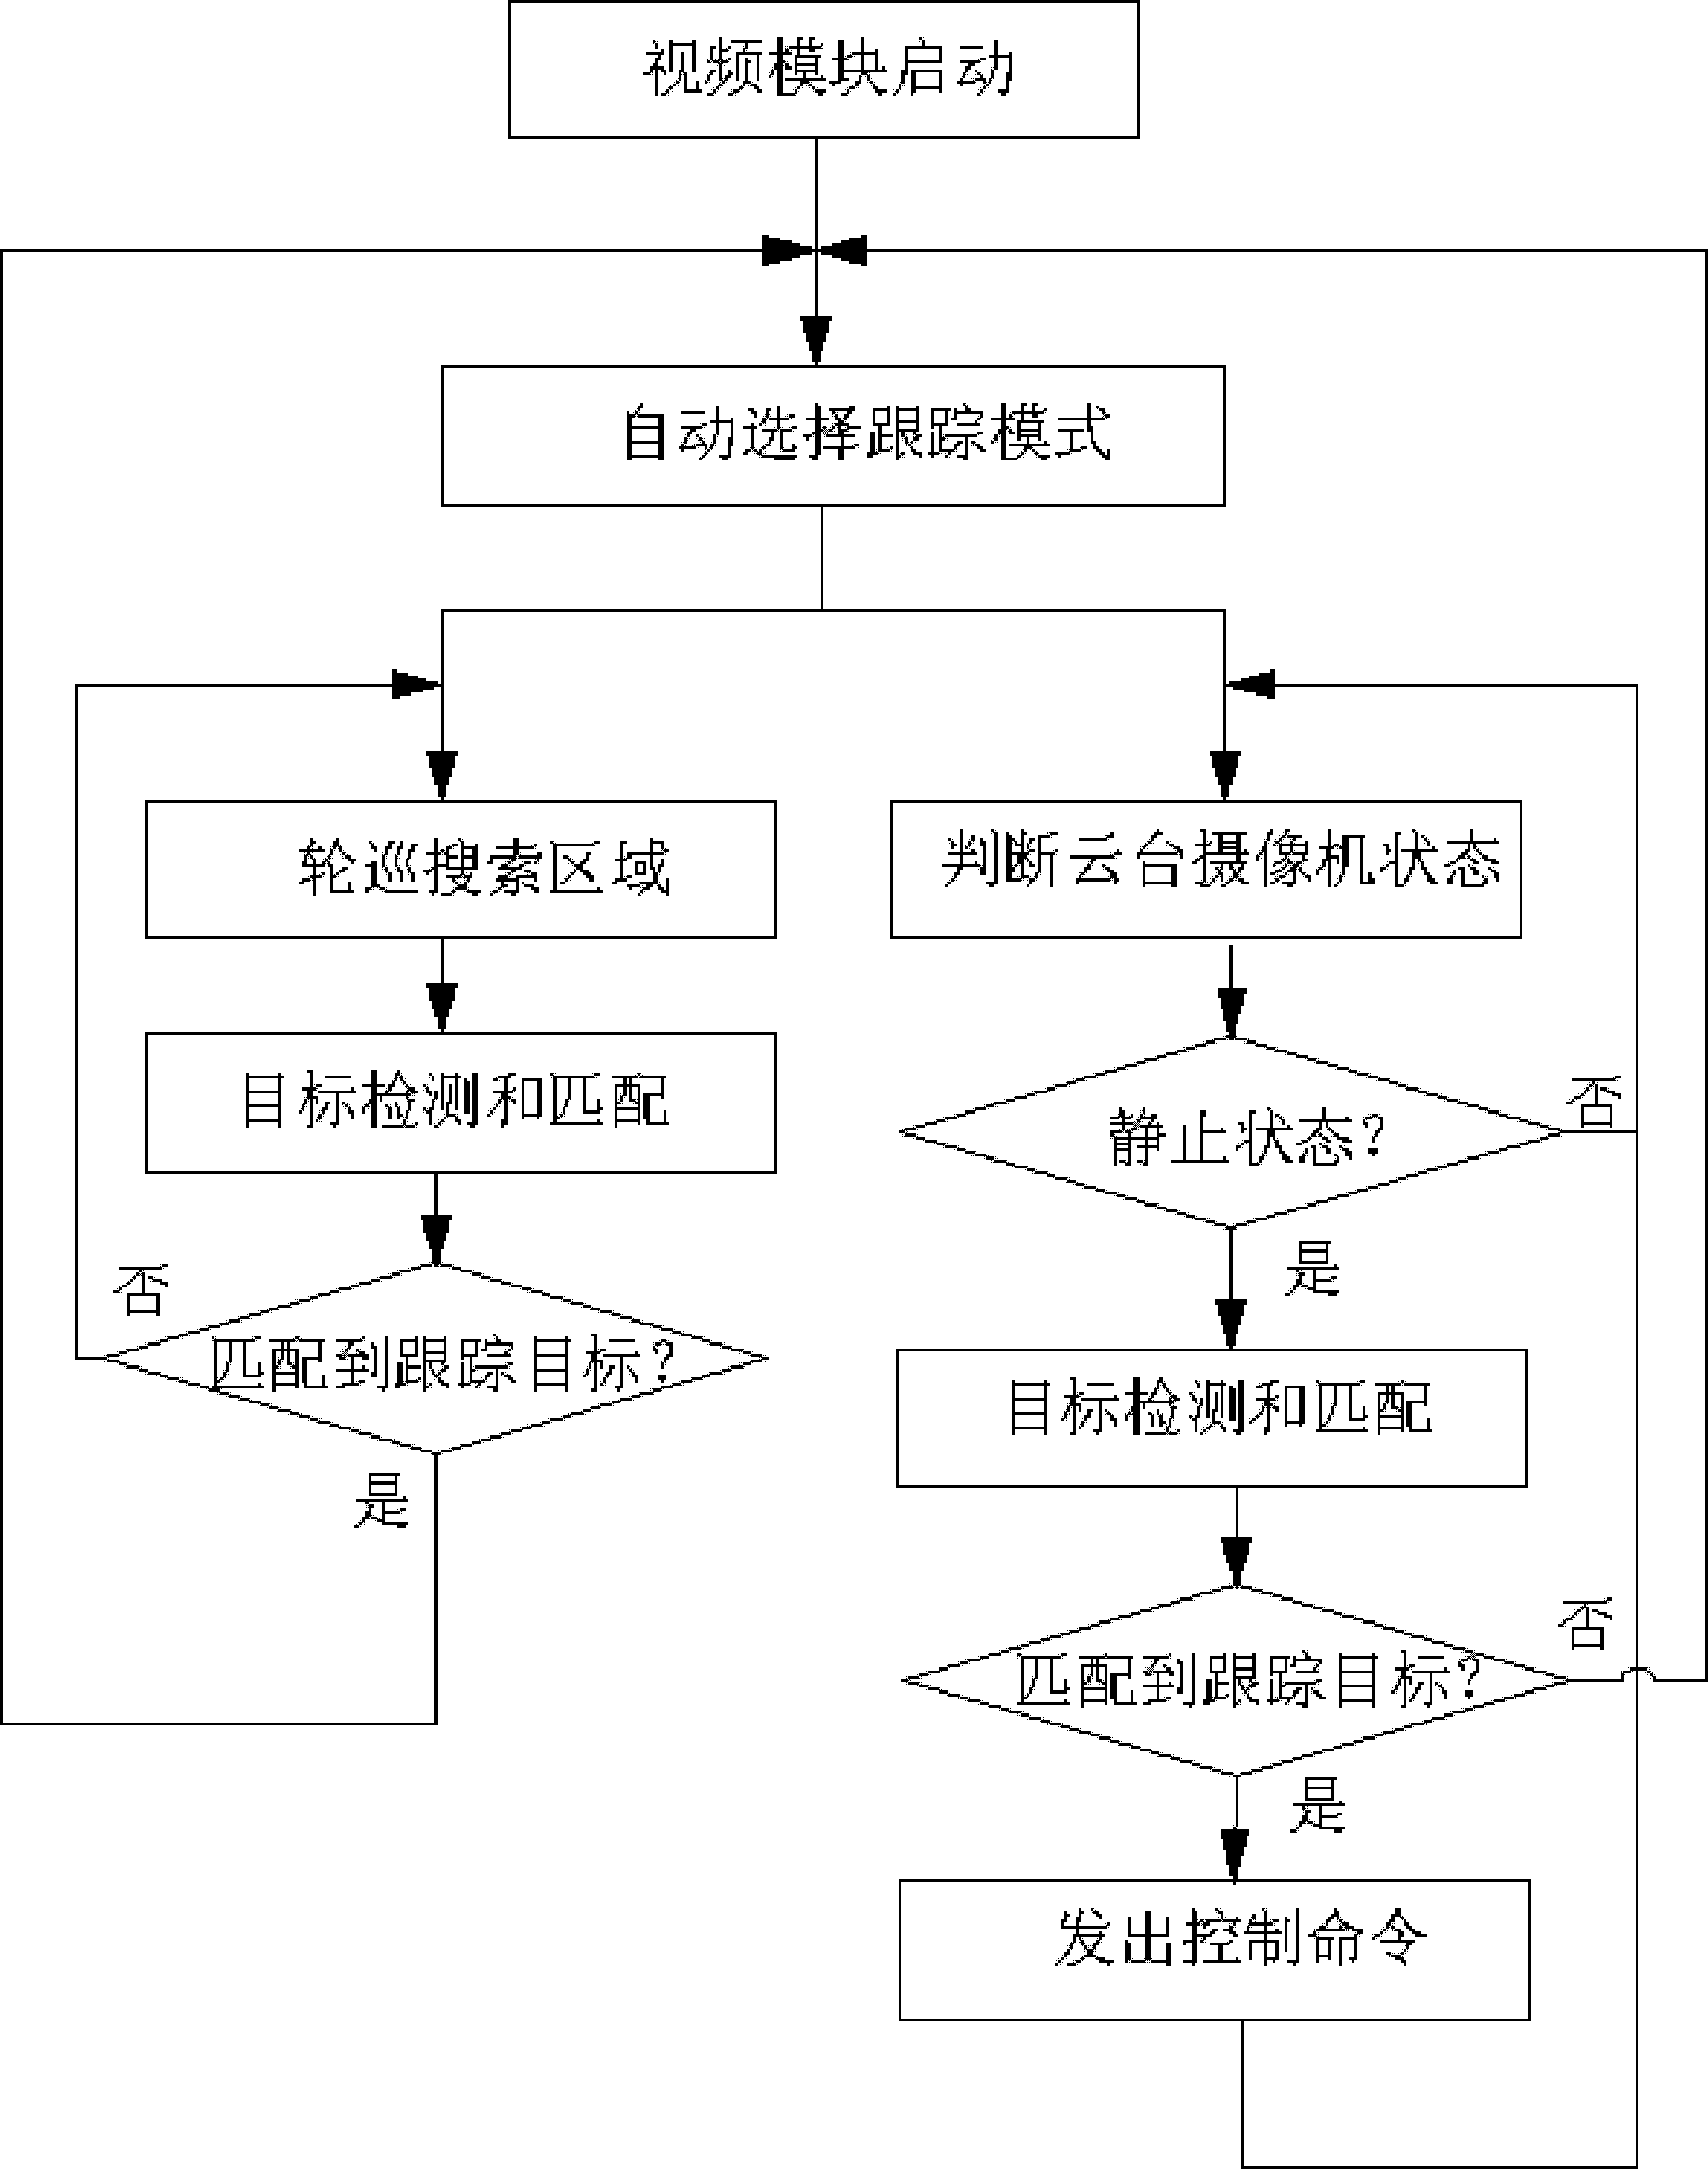 Method of controlling holder camera to automatically track target